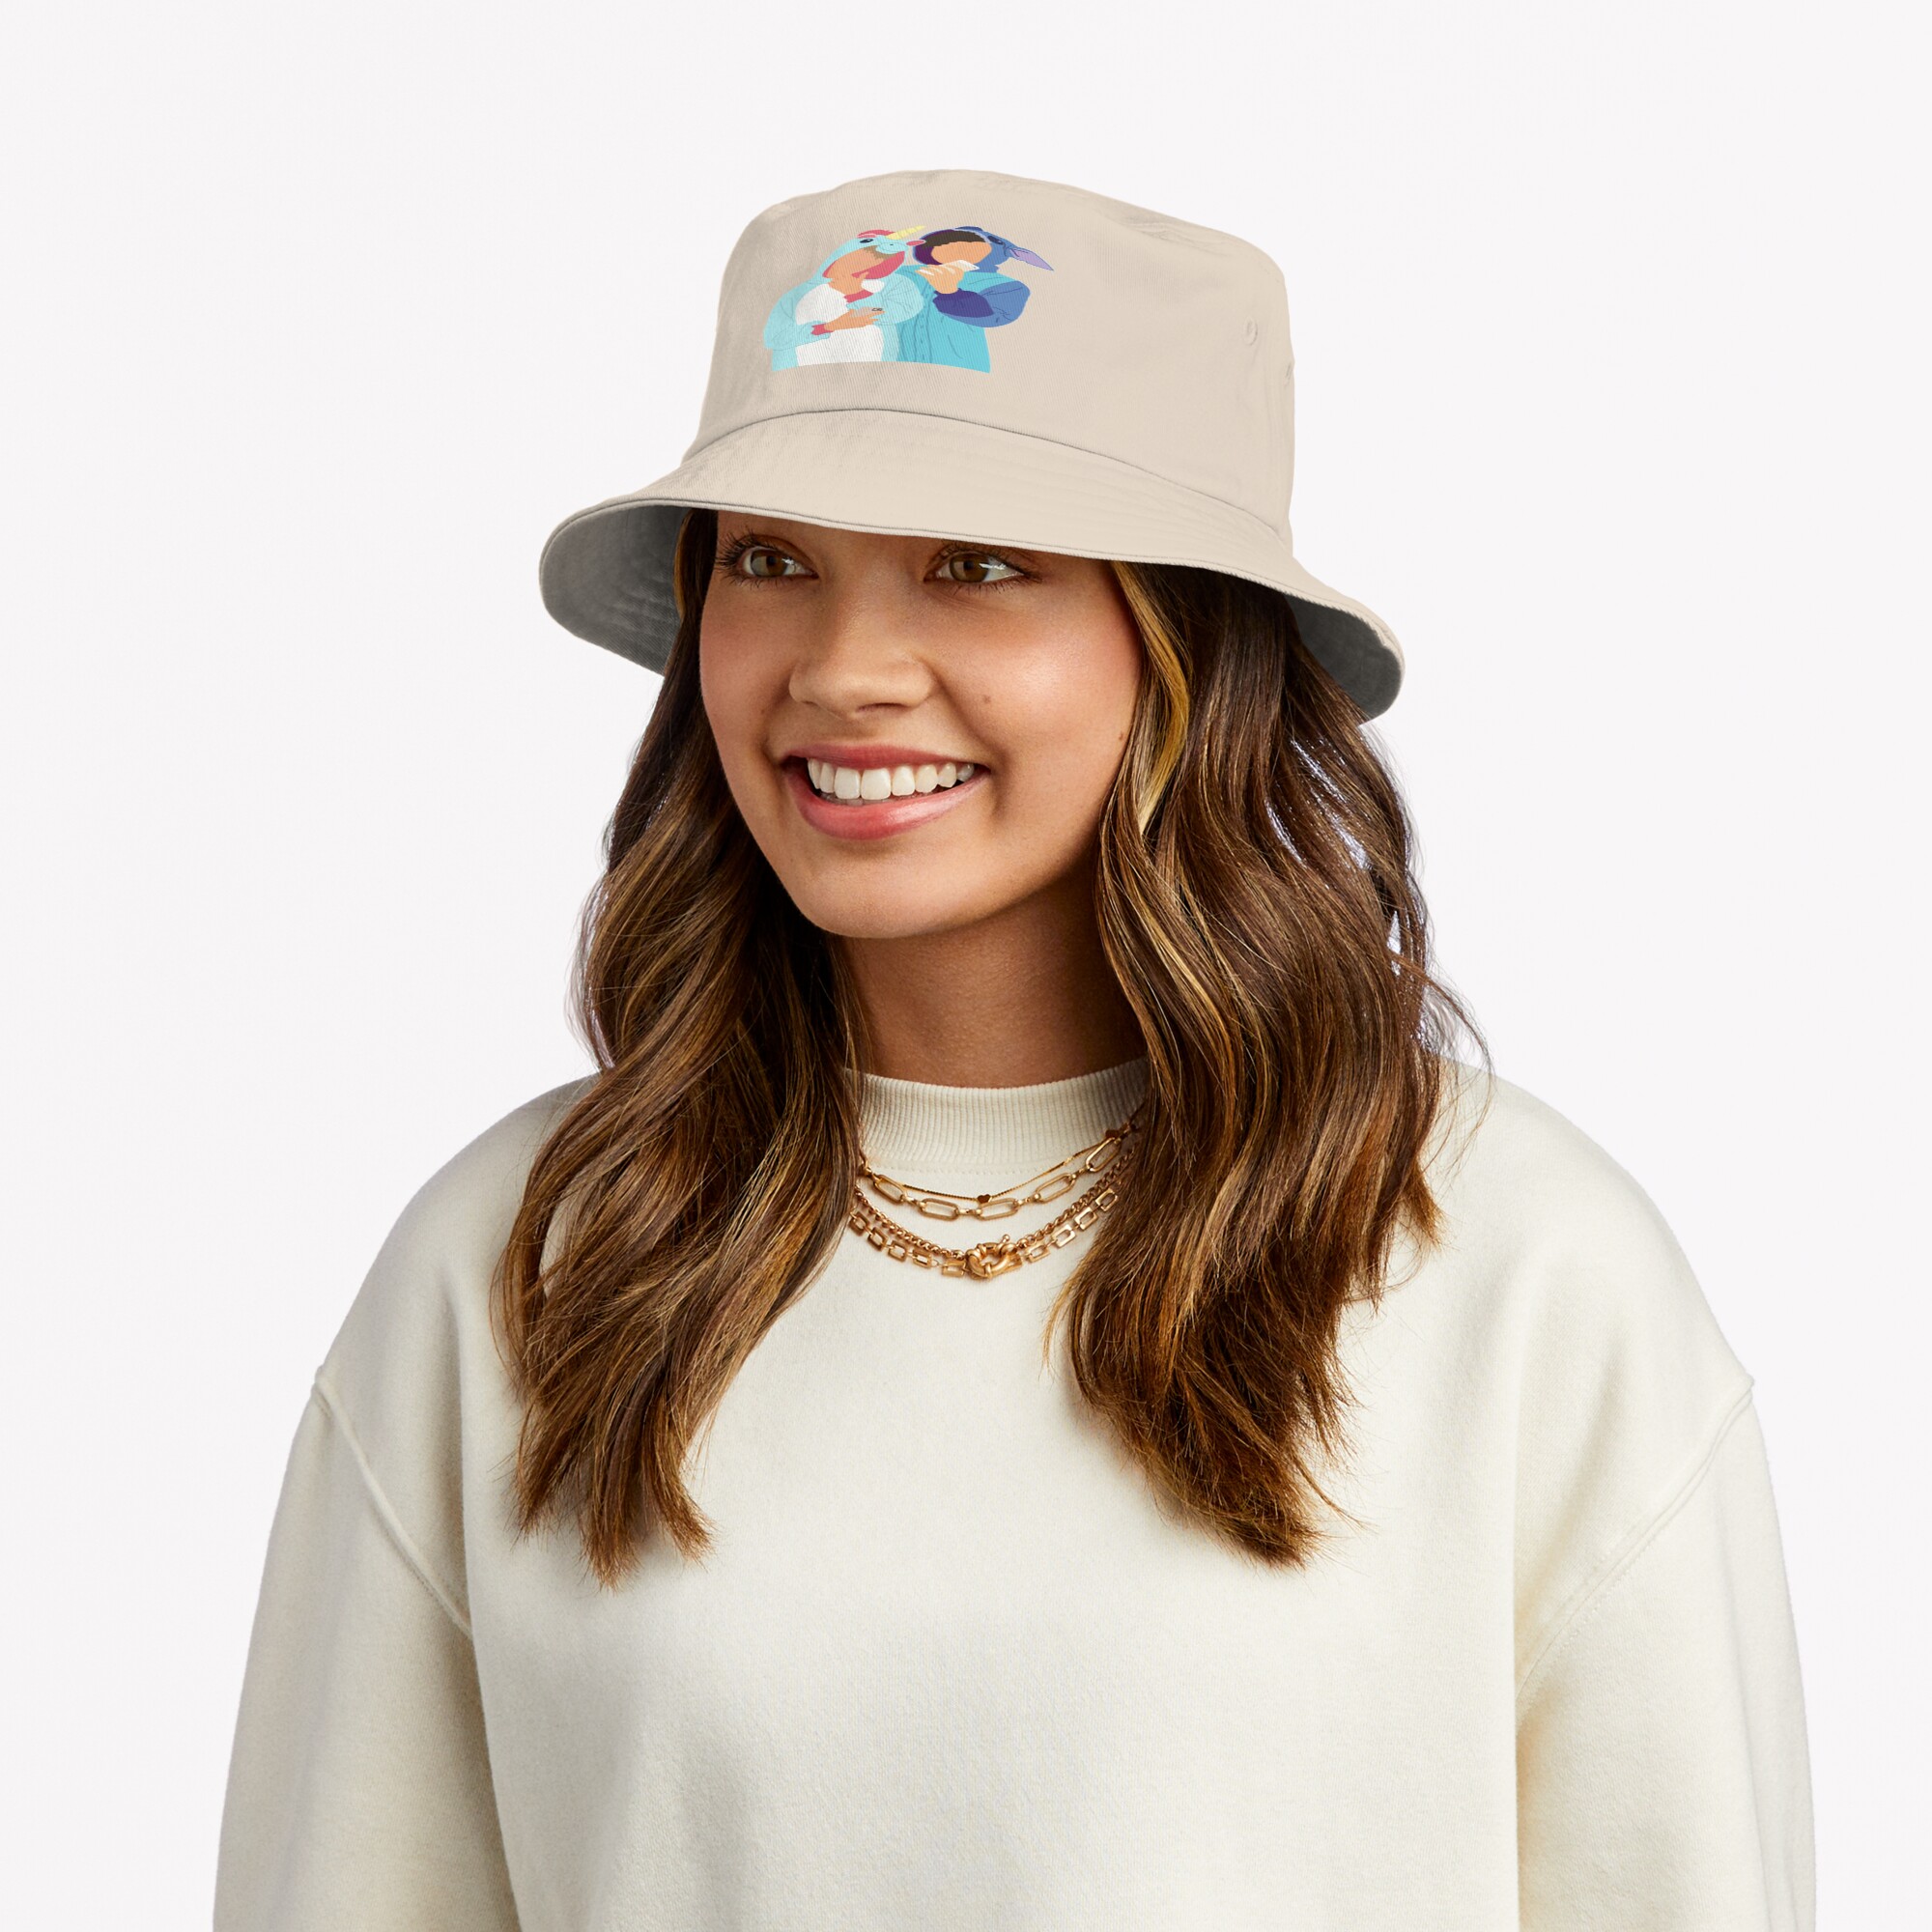 ssrcobucket hatwomense5d6c5f62bbf65eefrontsquare2000x2000 bgf8f8f8 8 - Sam And Colby Shop